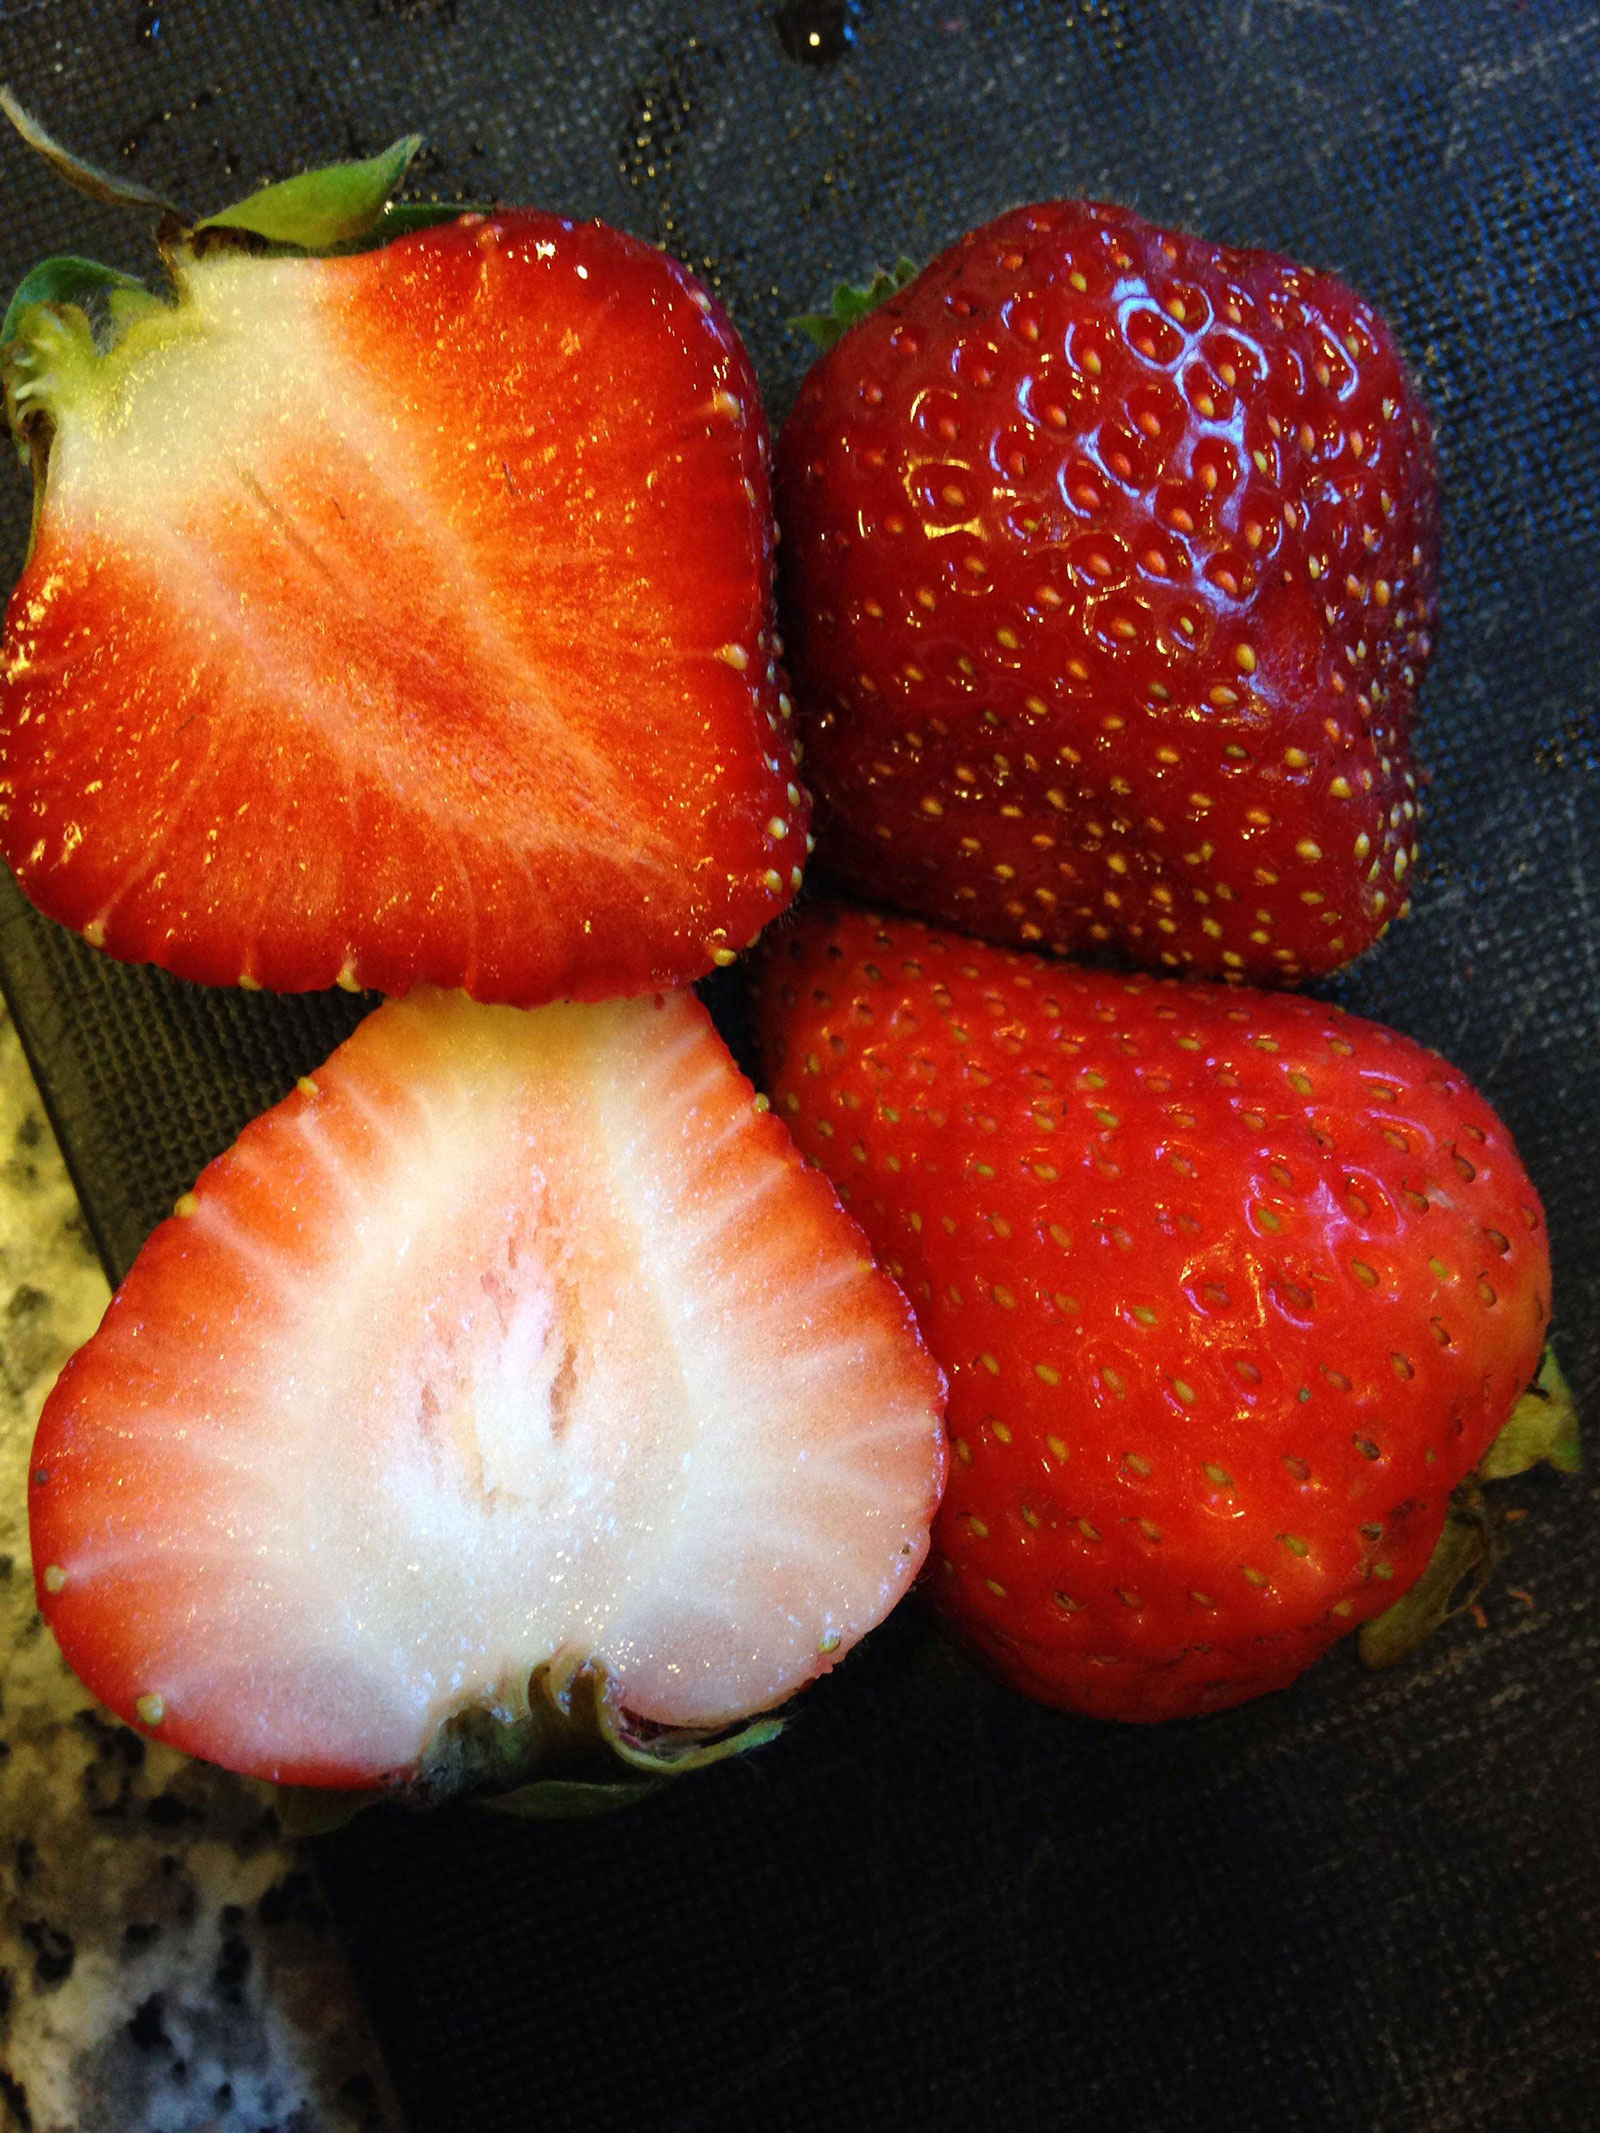 The difference between farm fresh and supermarket strawberries